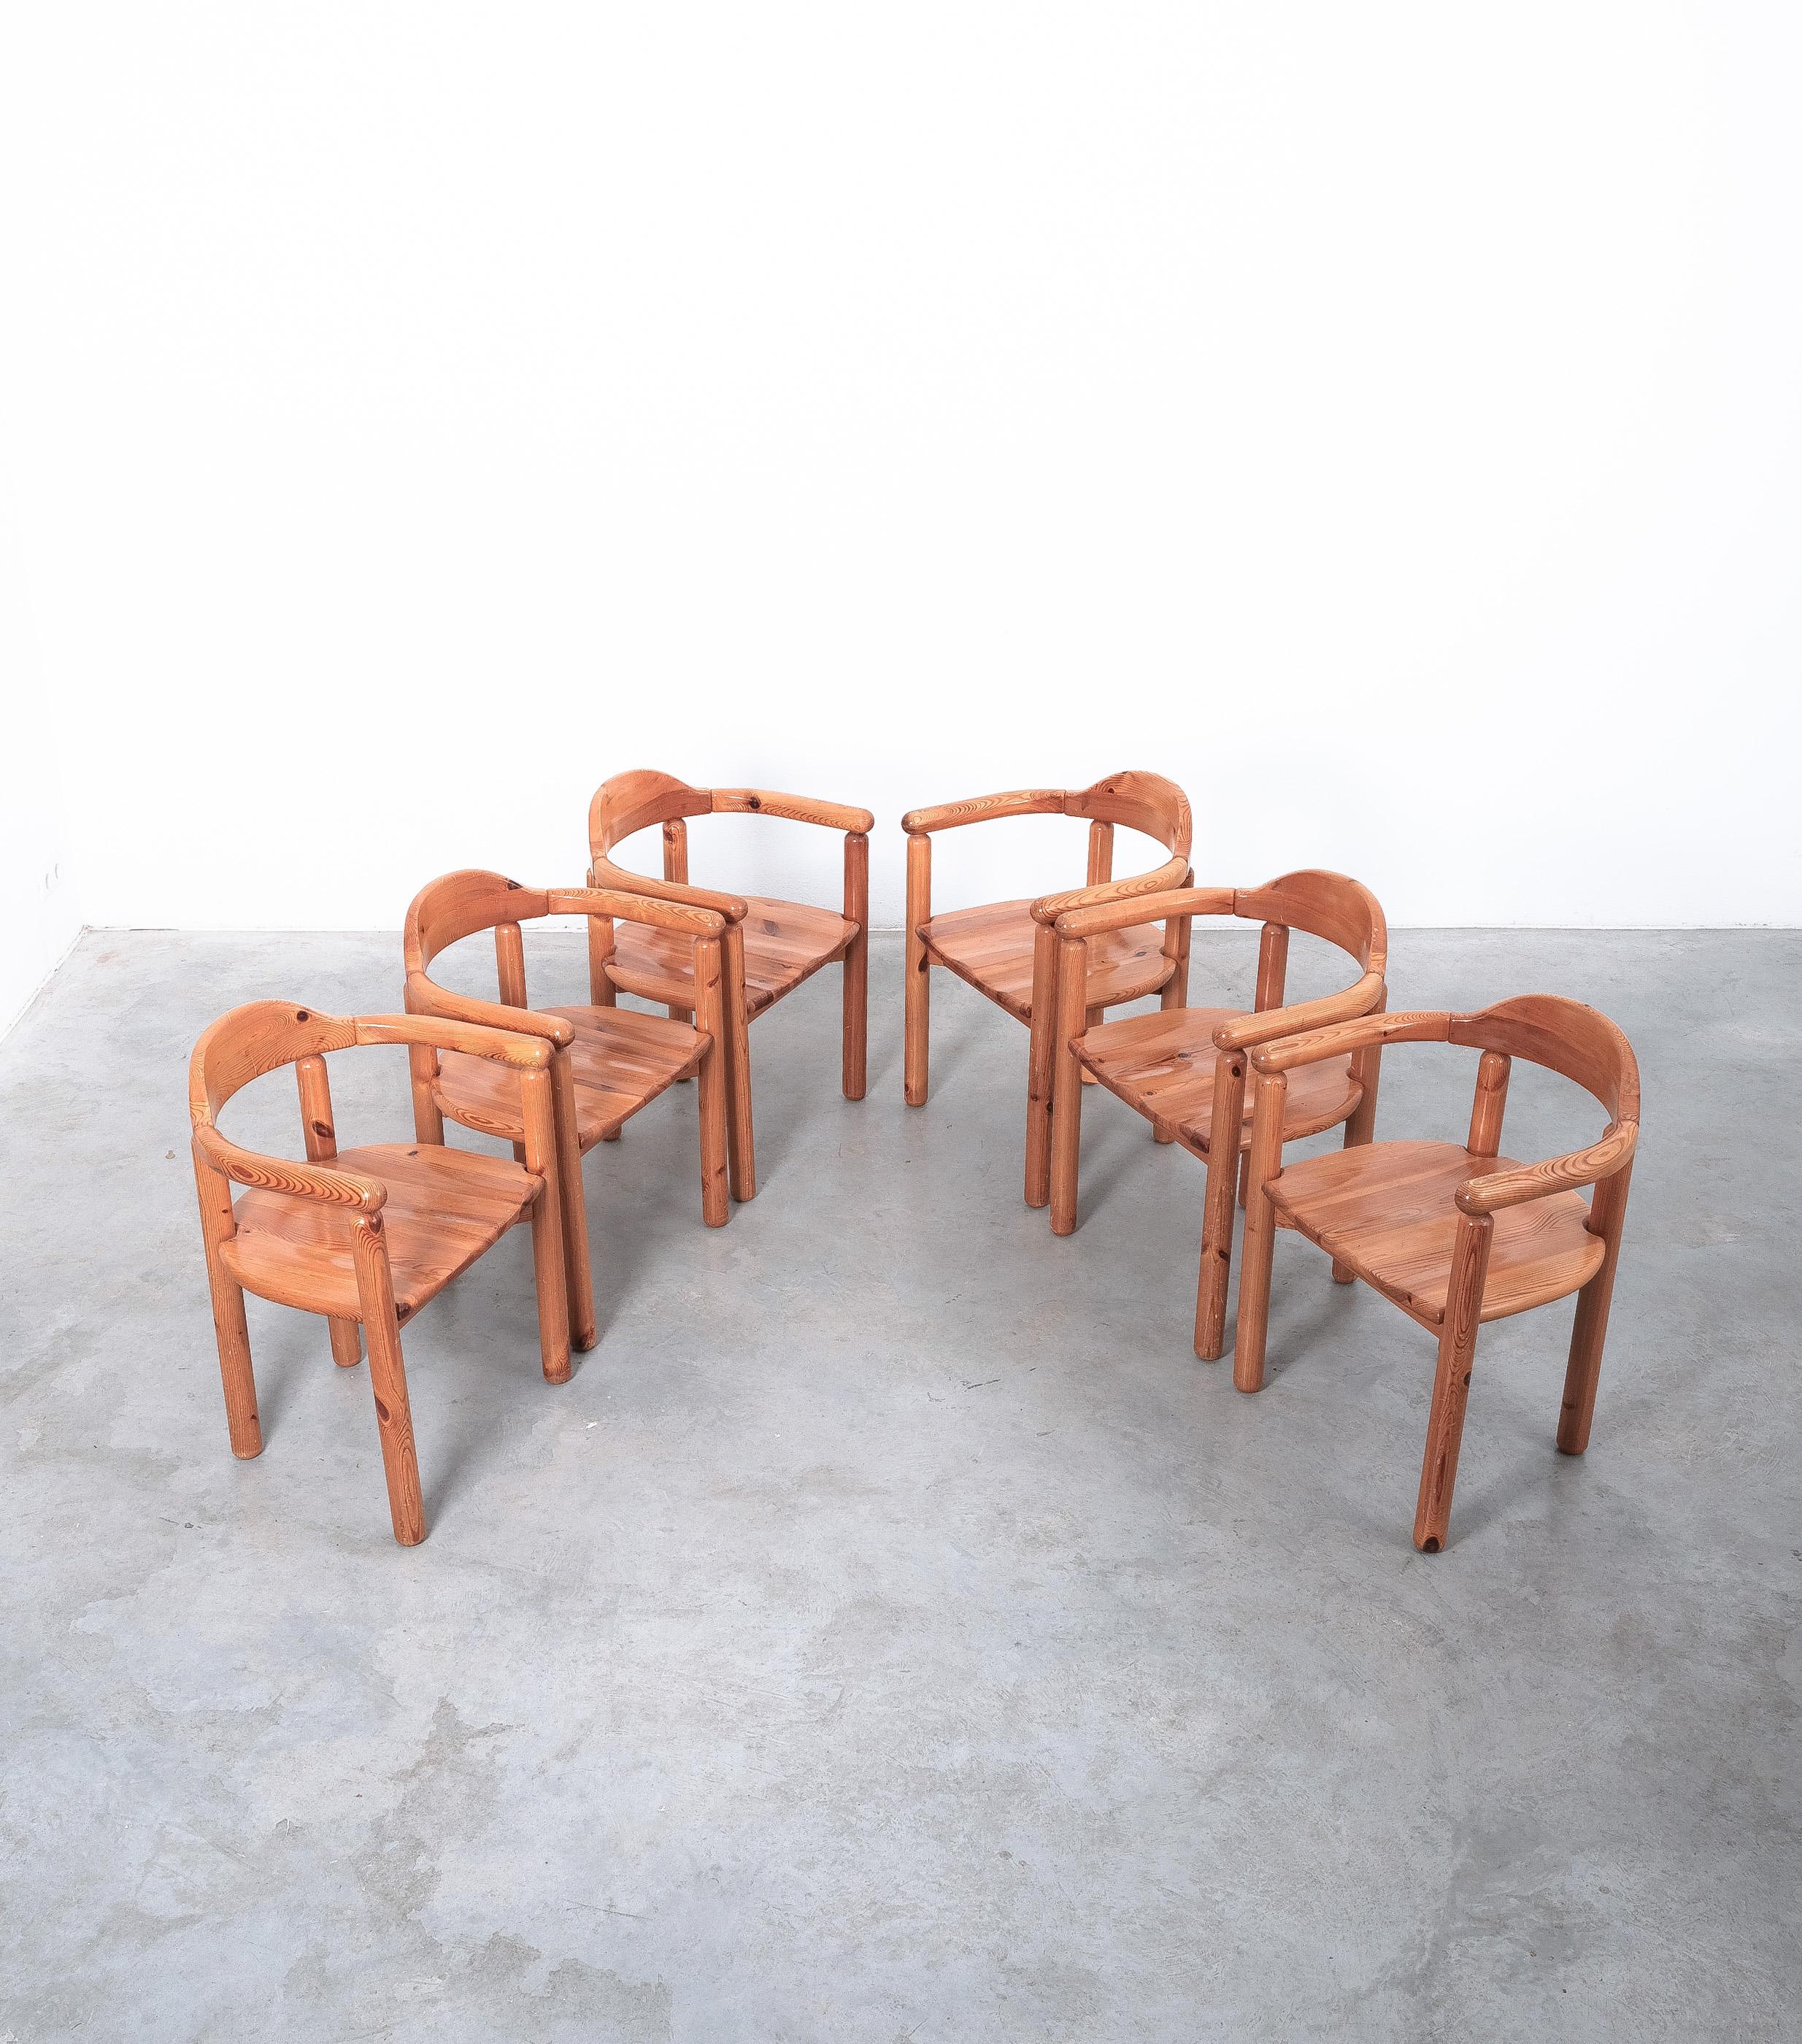 Rainer Daumiller Solid Pine Wood Dining Chairs '6' Danish Design, 1970 In Good Condition For Sale In Vienna, AT